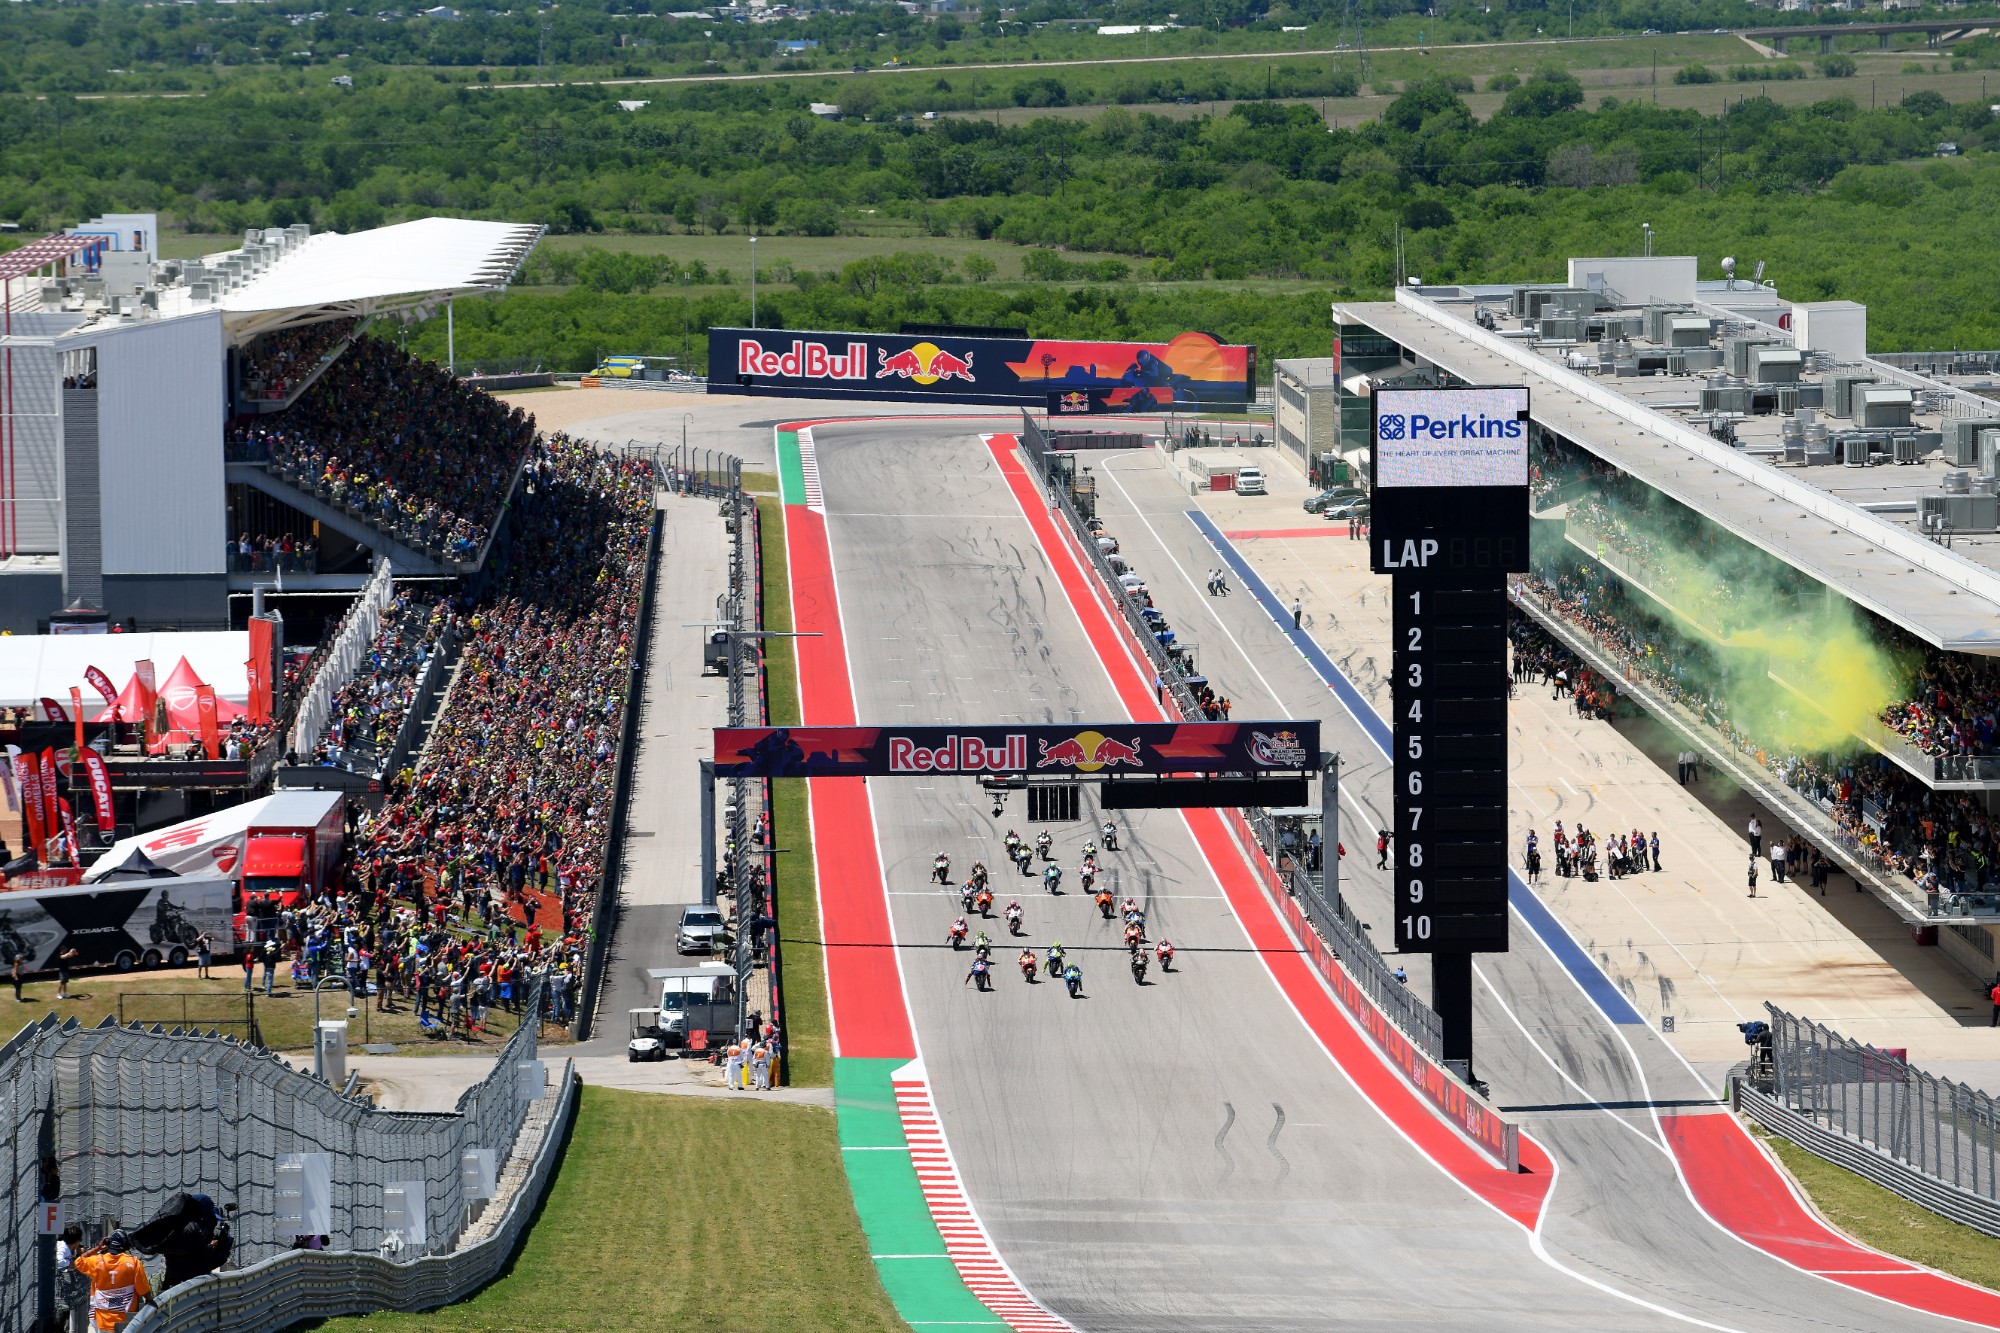 MotoGP How To Watch The Action This Weekend At Circuit Of The Americas